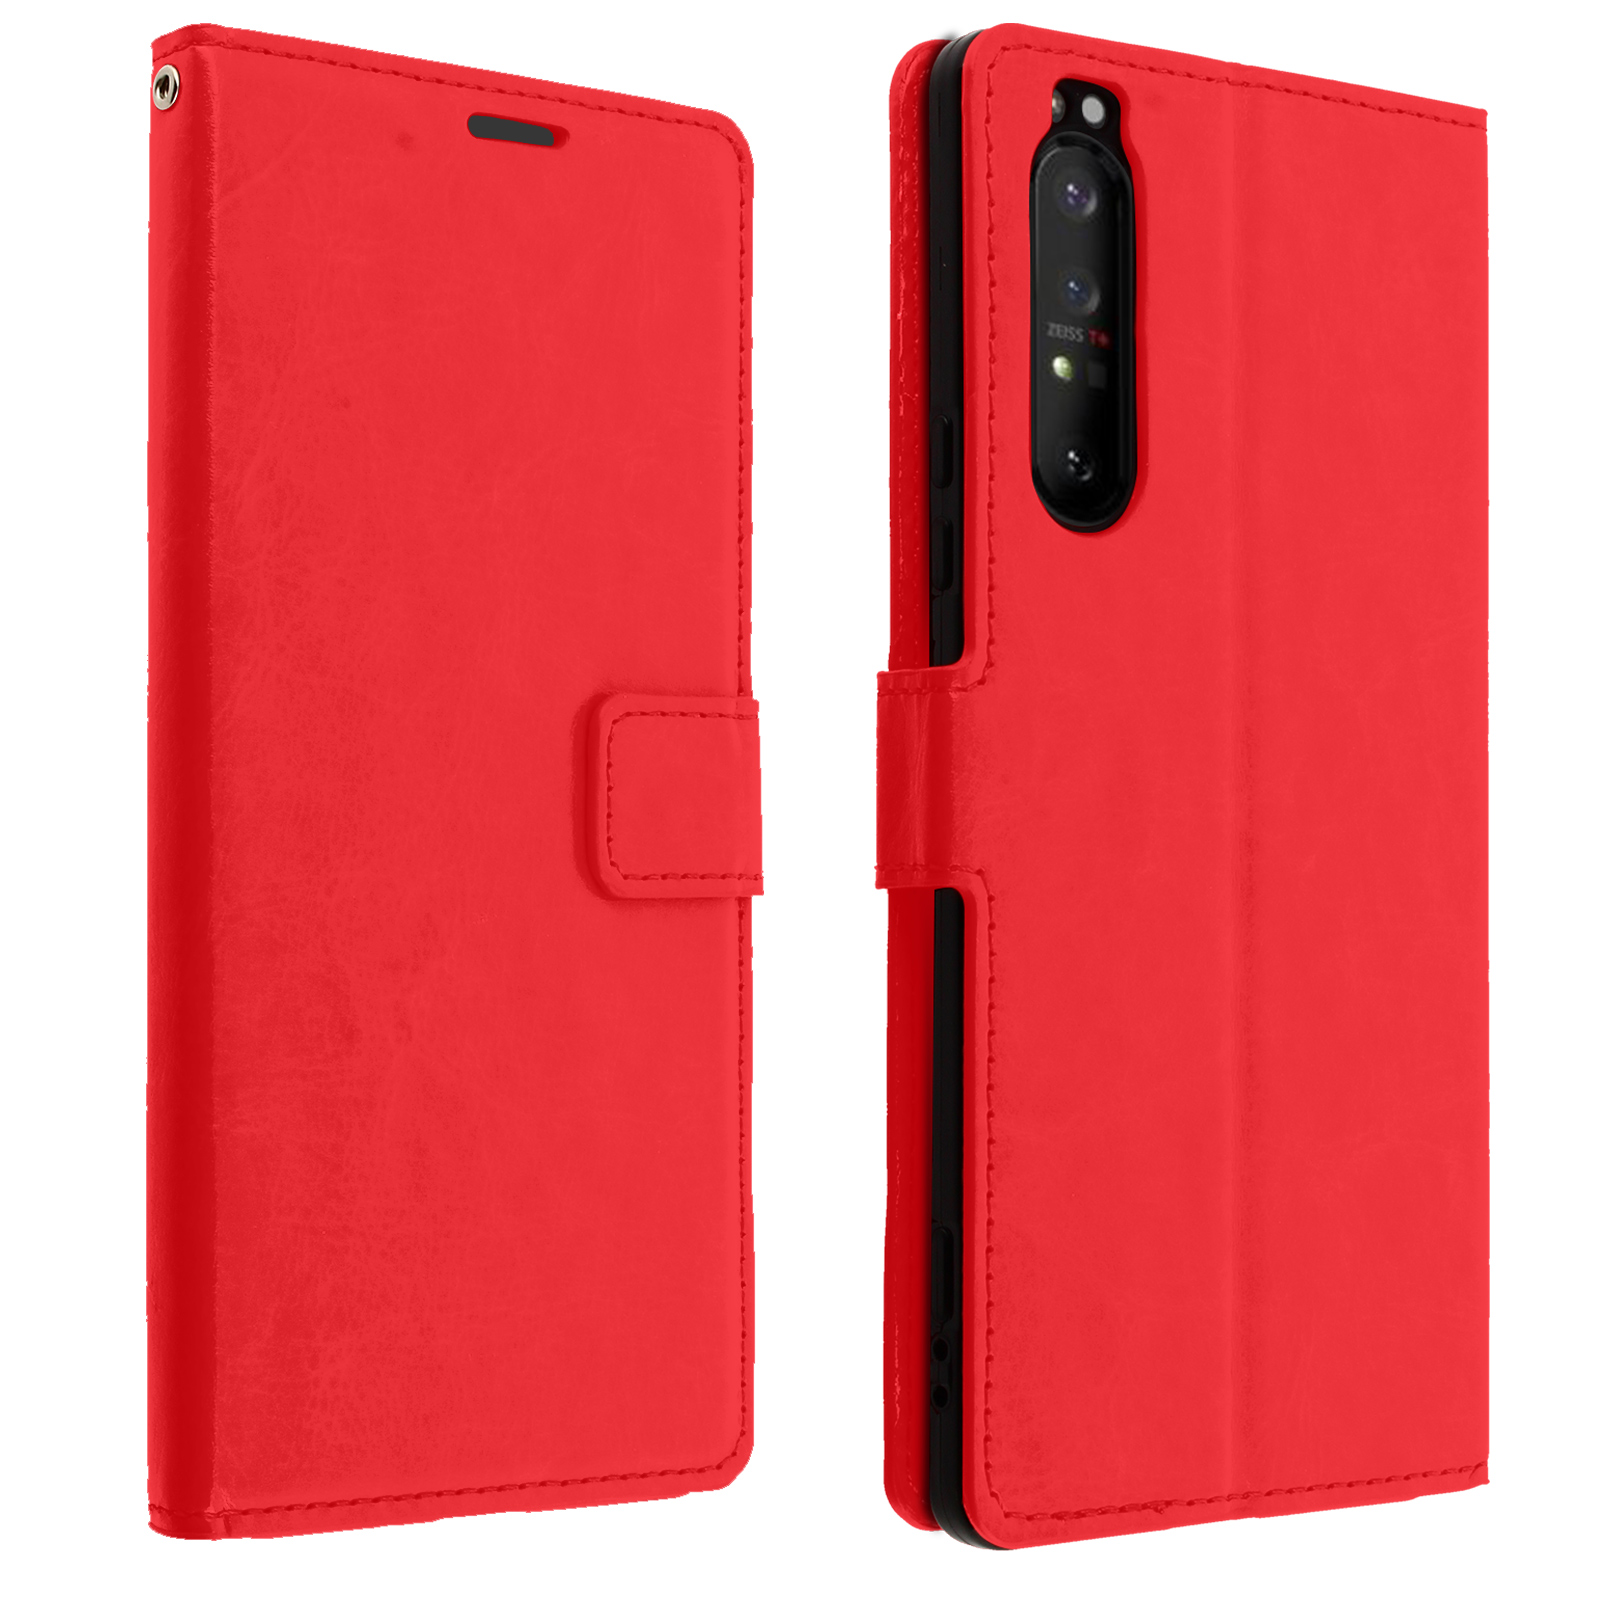 AVIZAR Vintage Series, Bookcover, Xperia 1 Sony, Rot II